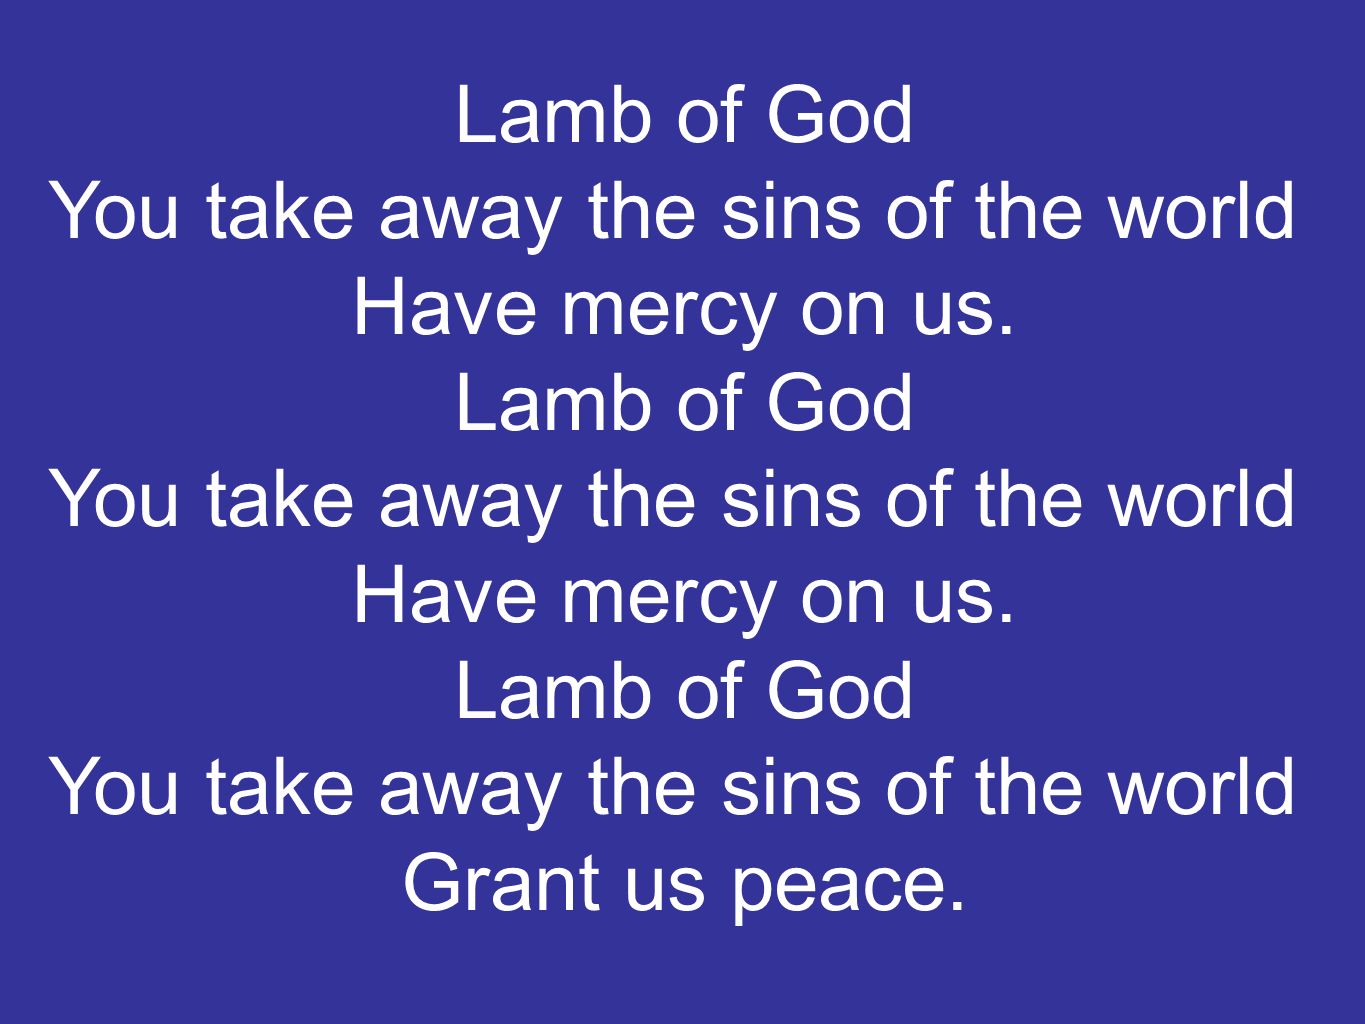 Lamb of God You take away the sins of the world Have mercy on us.